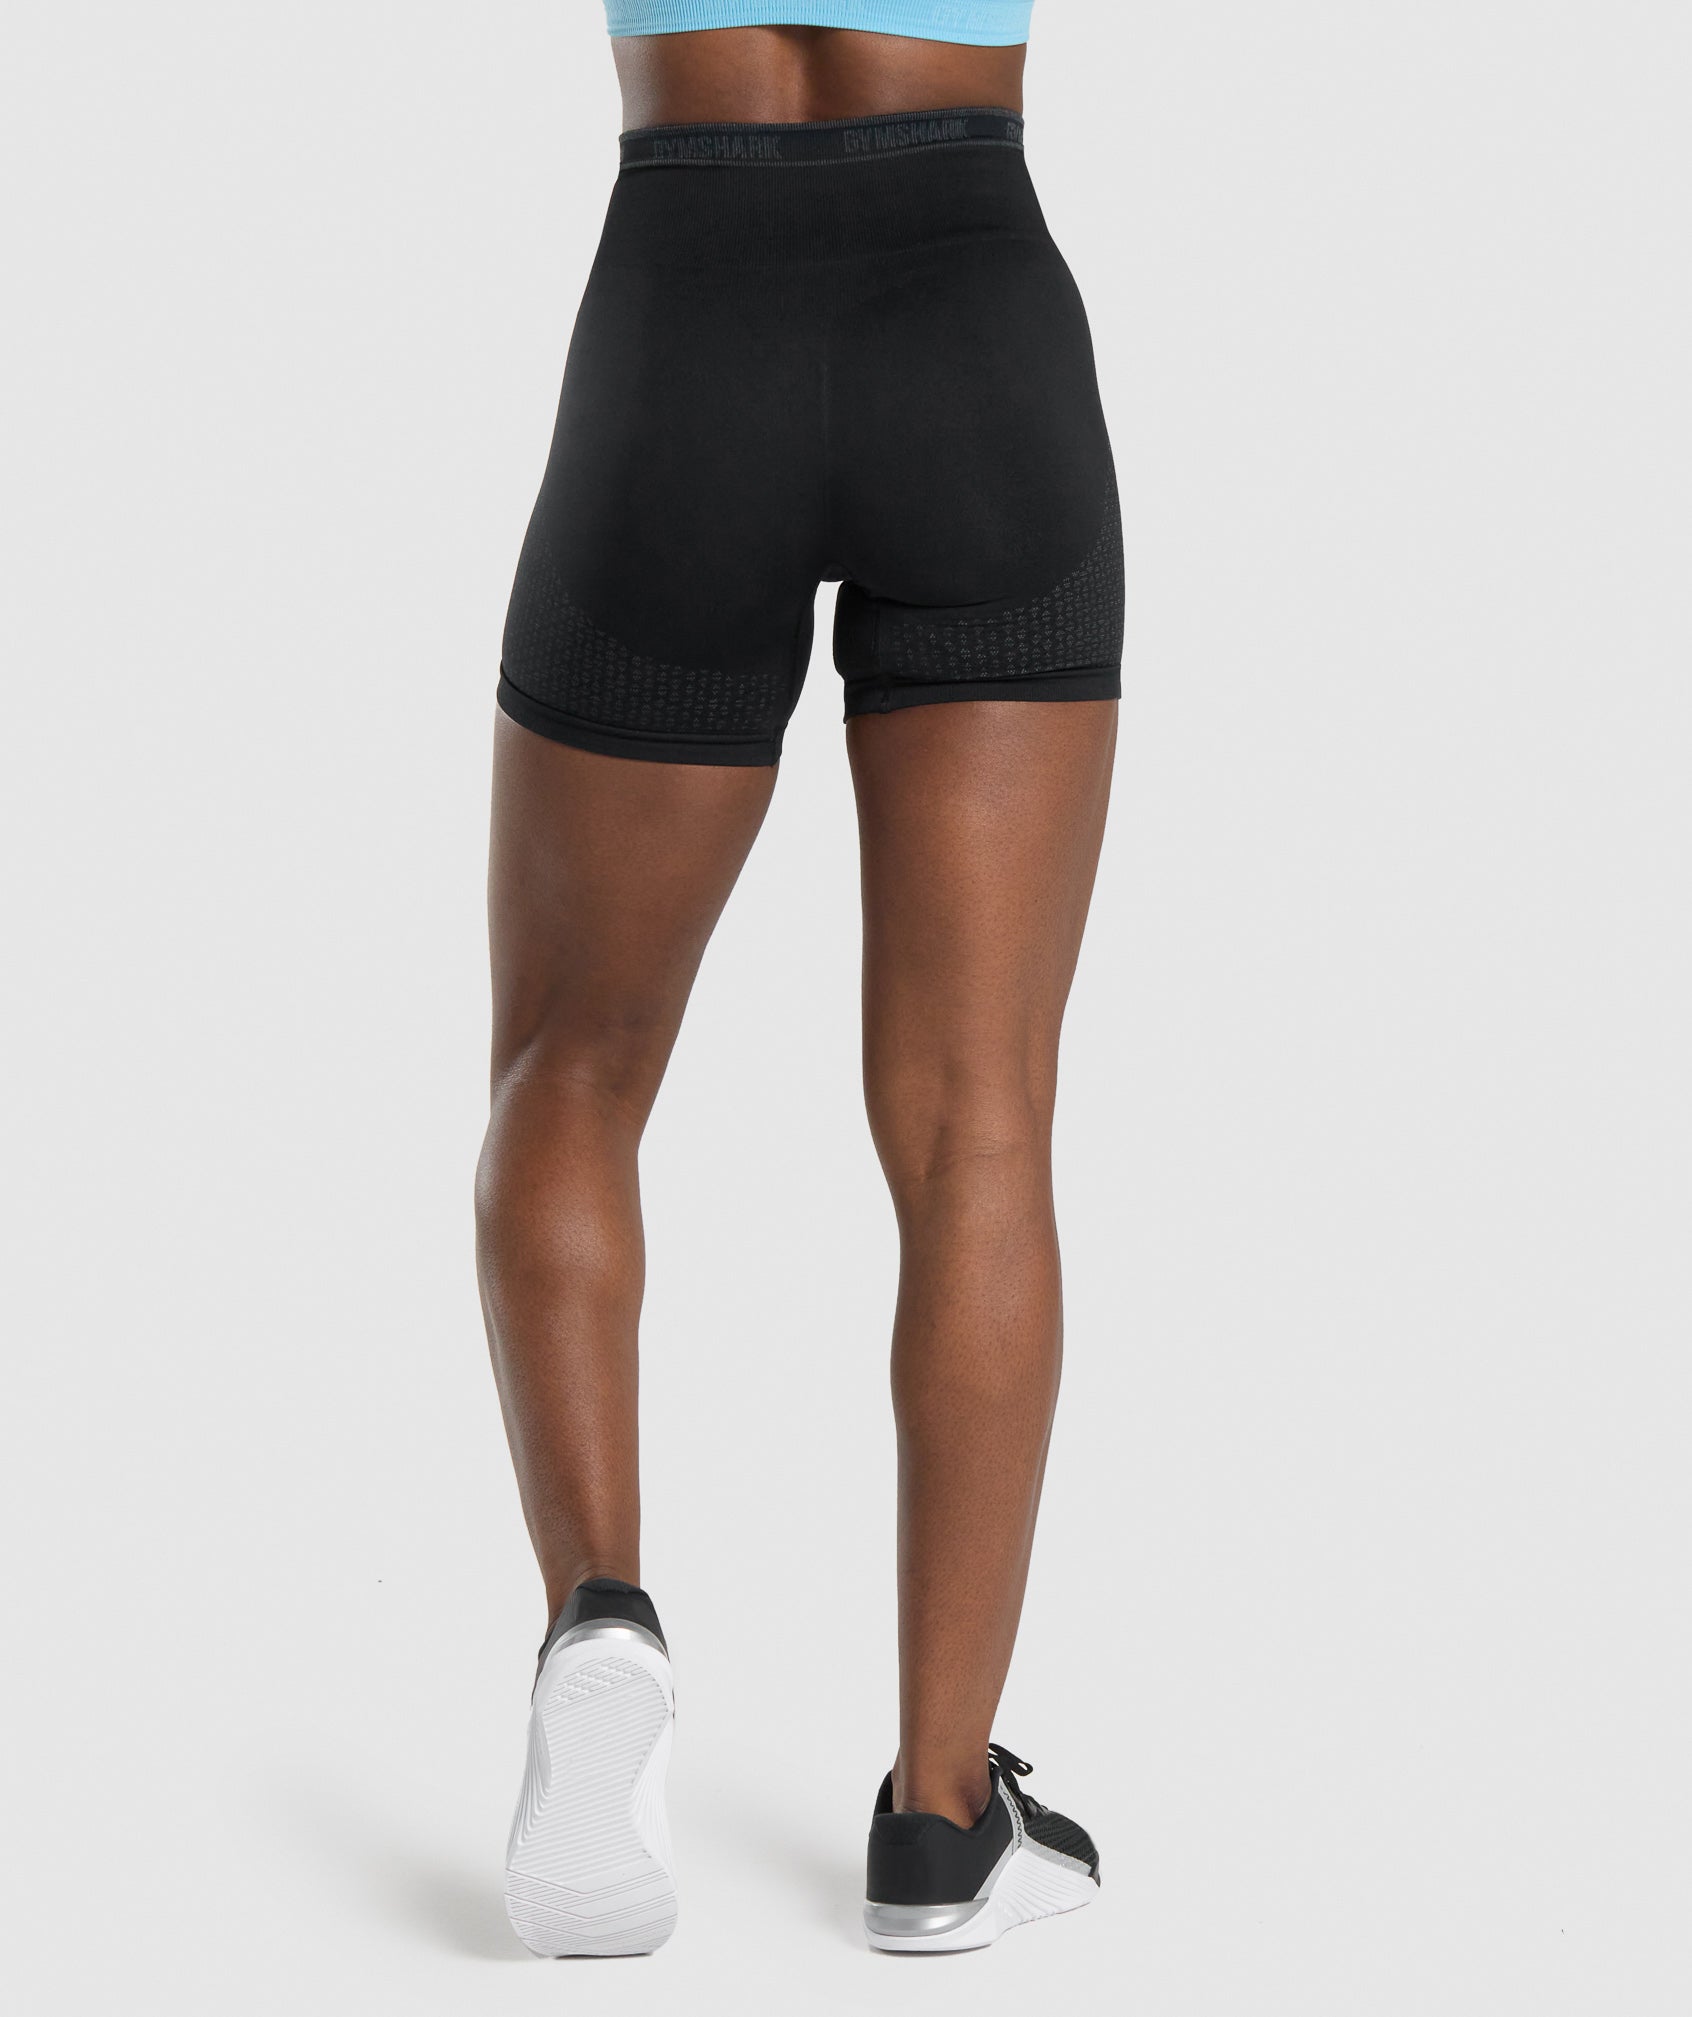 Apex Seamless Shorts in Black/Grey - view 2